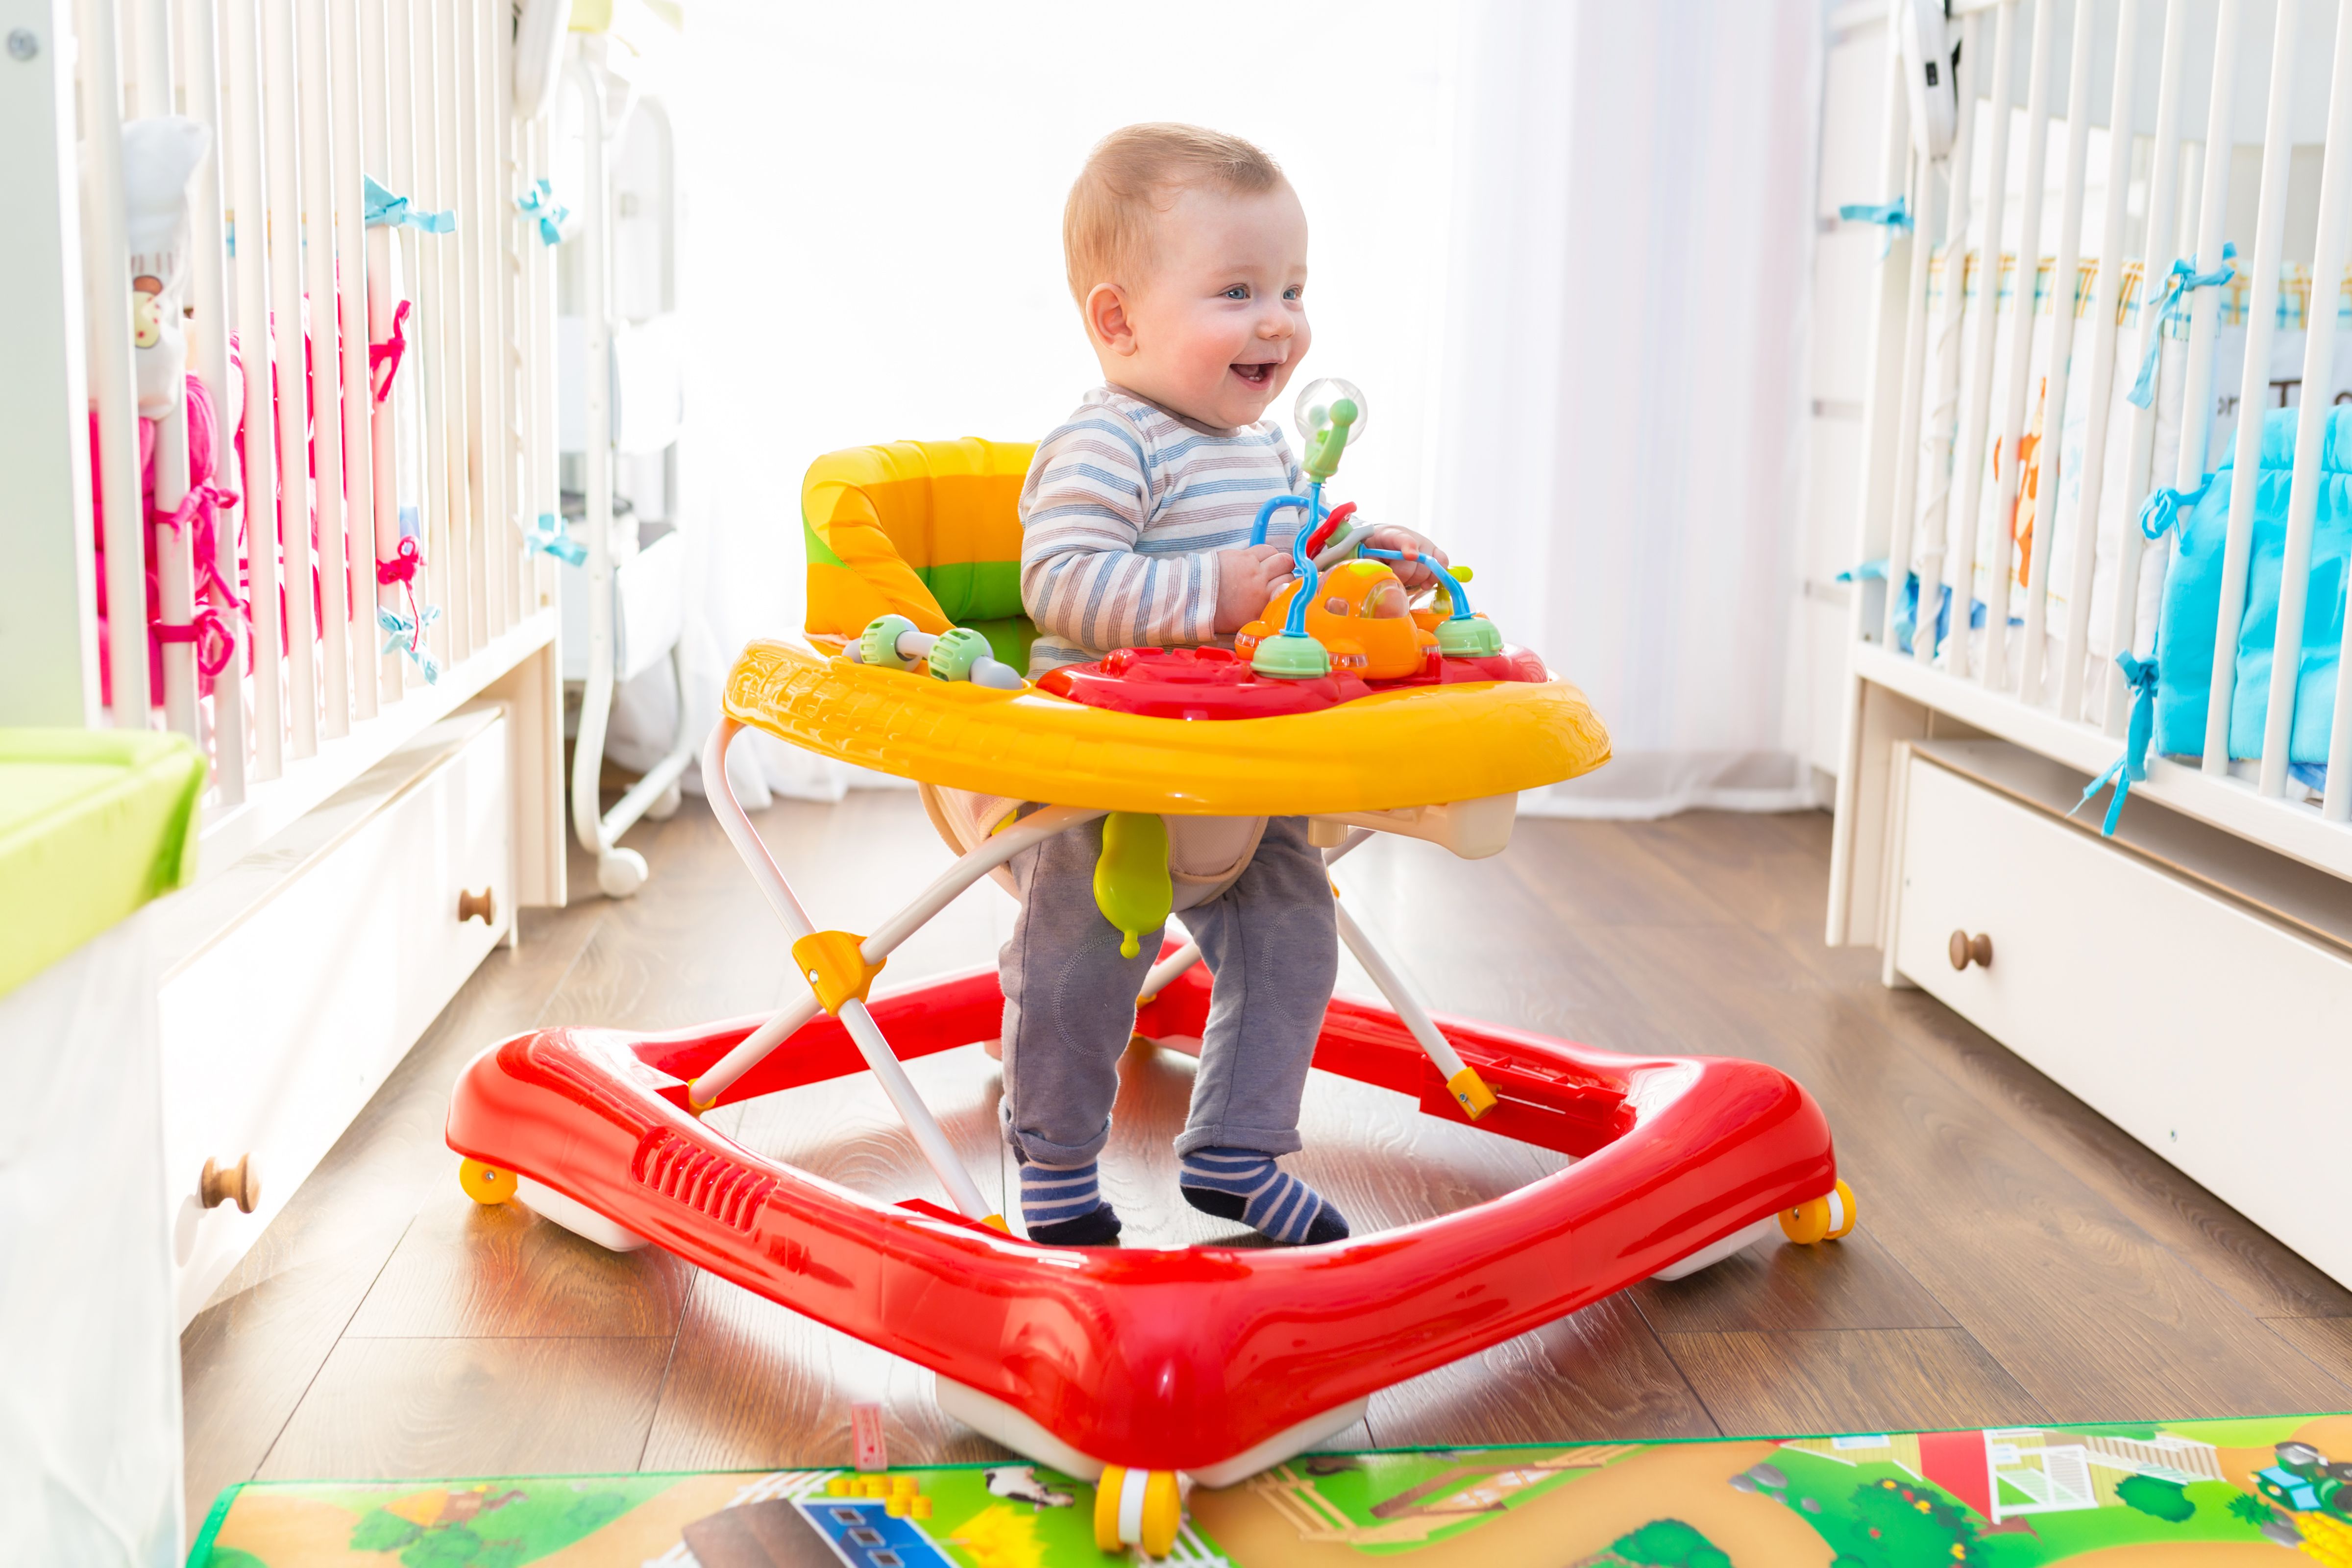 More than 9,000 US children are injured by infant walkers every